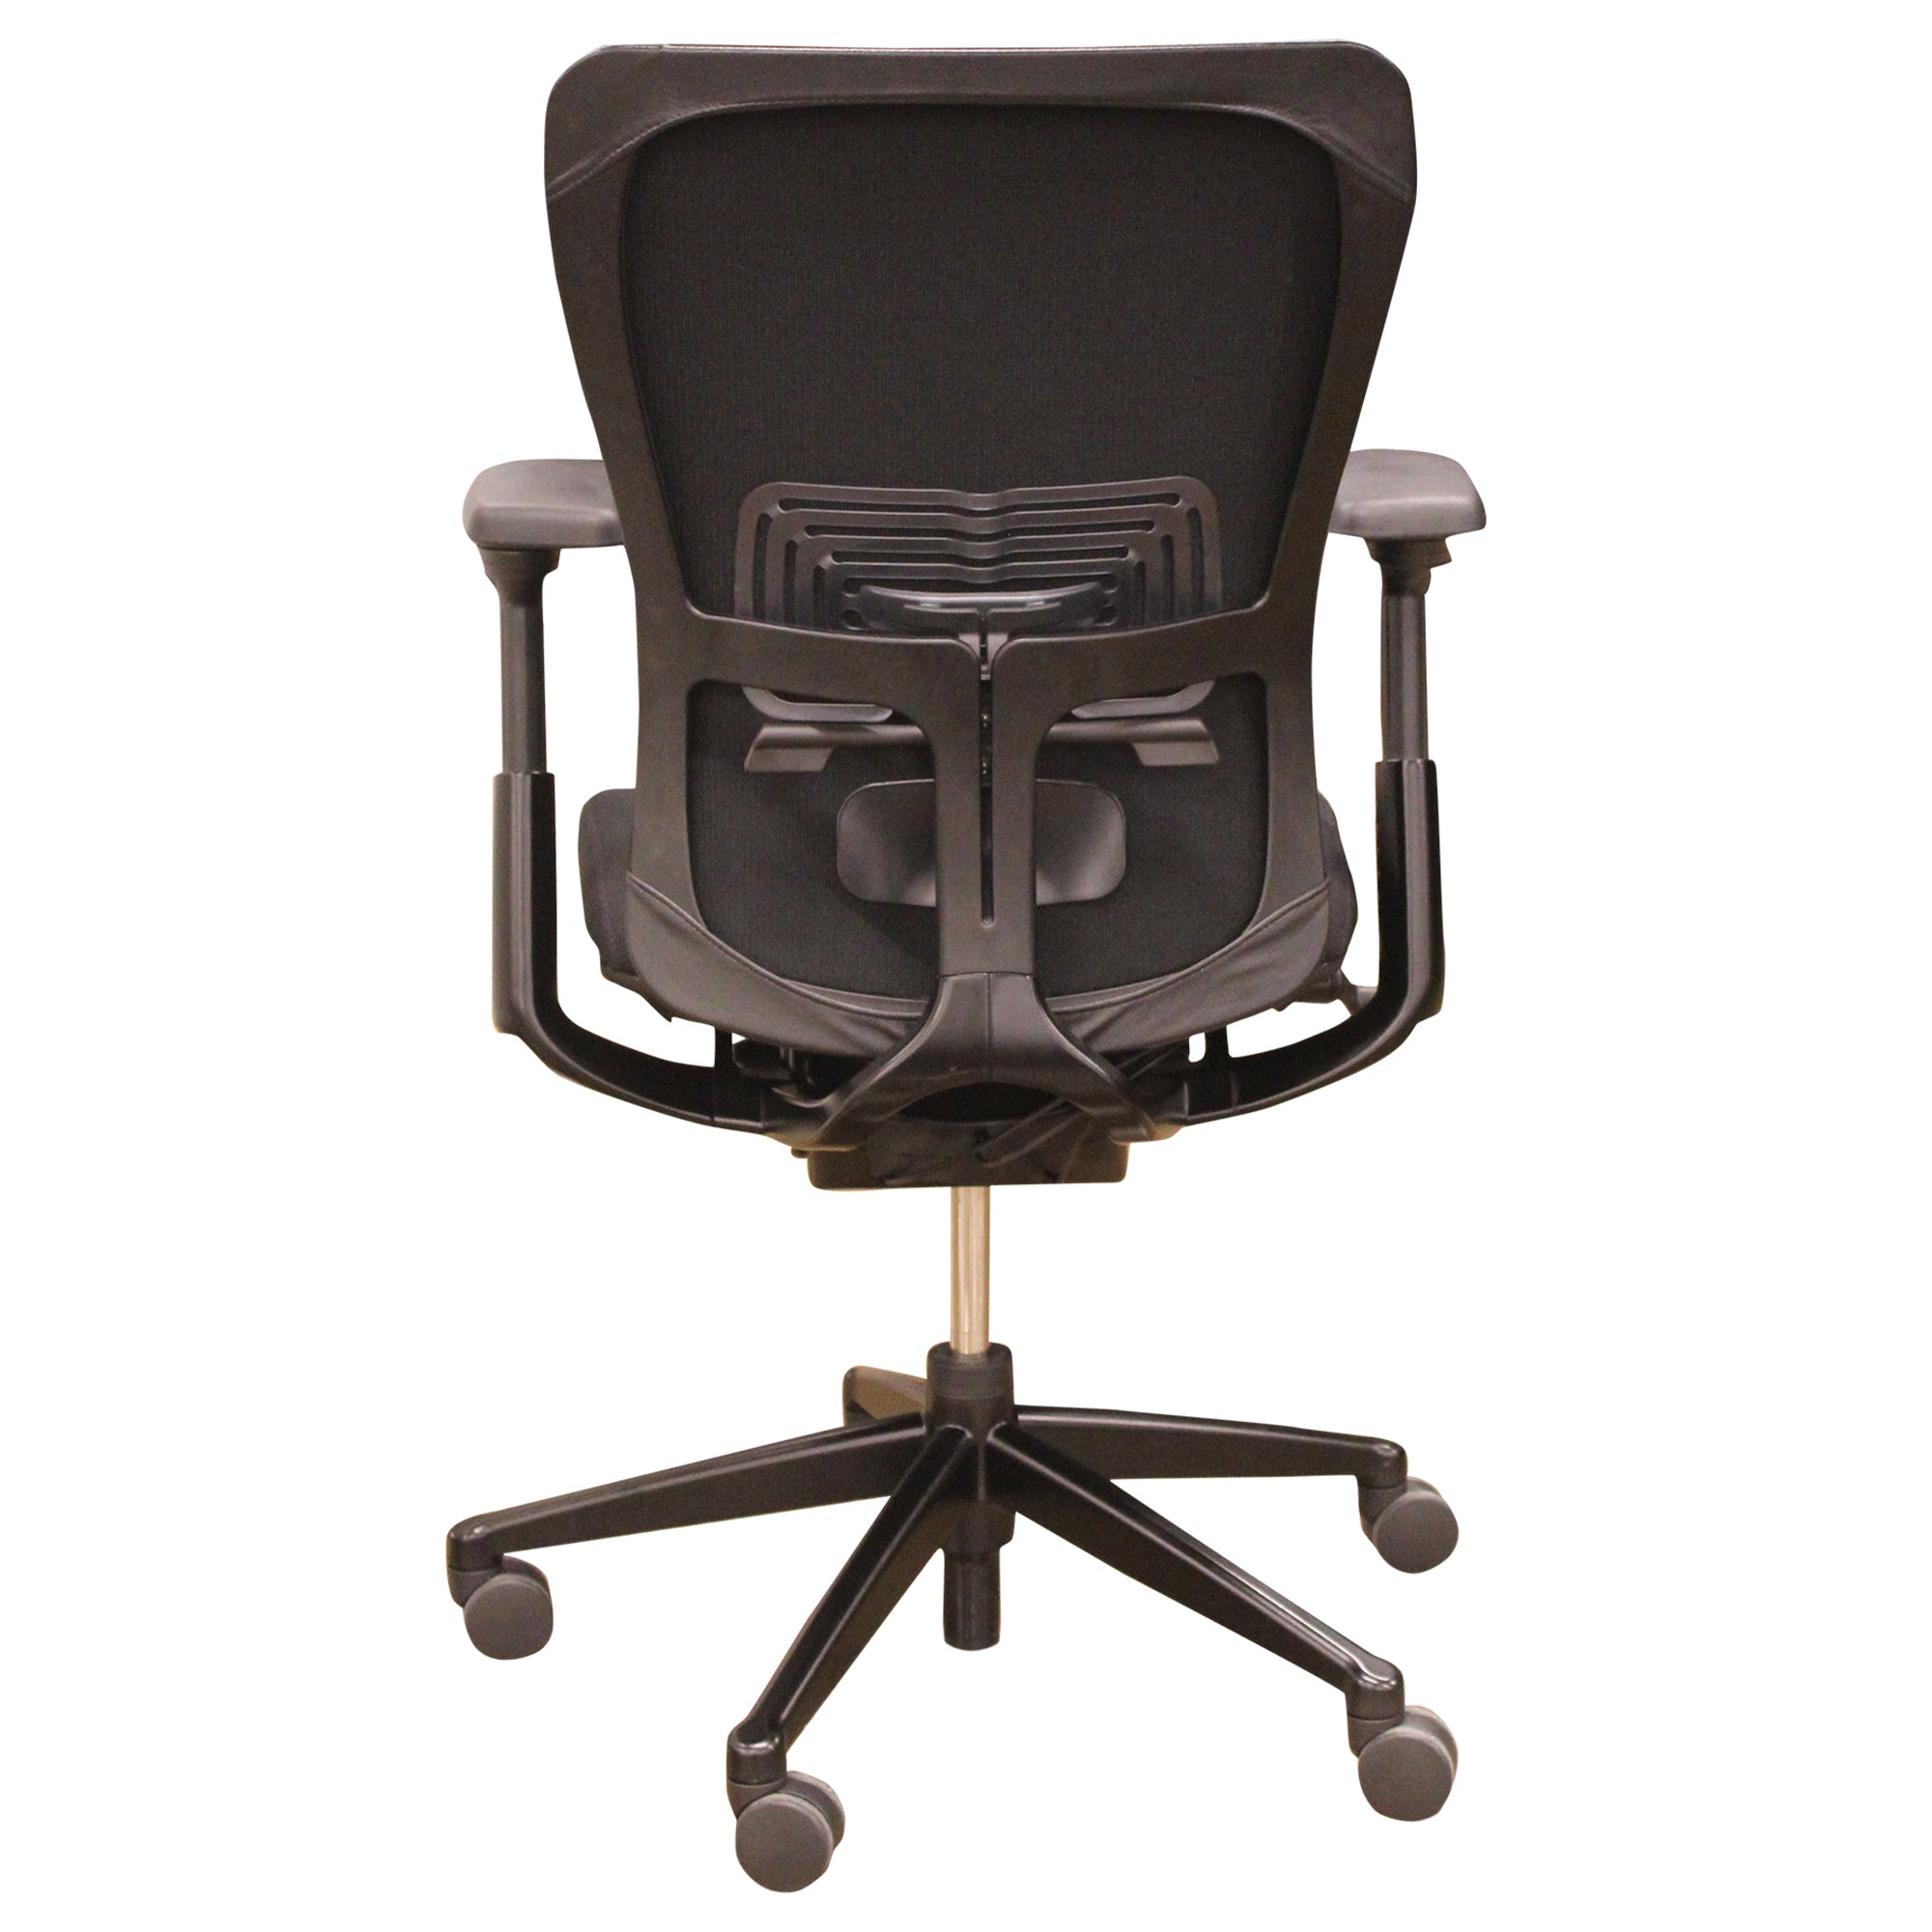 Haworth Zody Task Chair with Cover, Black - Preowned